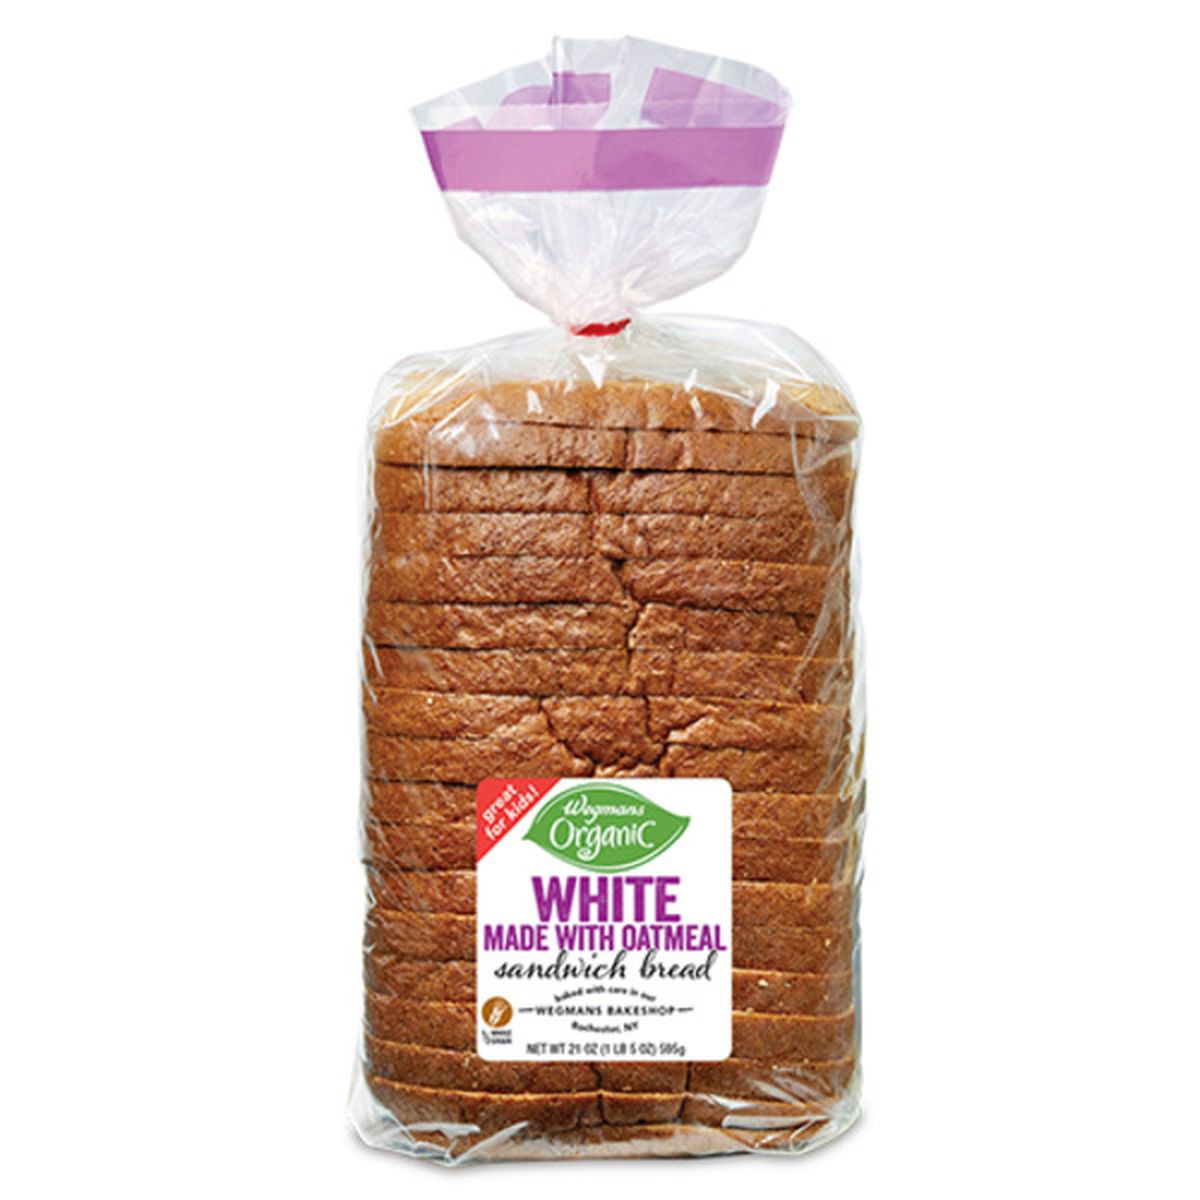 Calories in Wegmans Organic White Made With Oatmeal Sandwich Bread